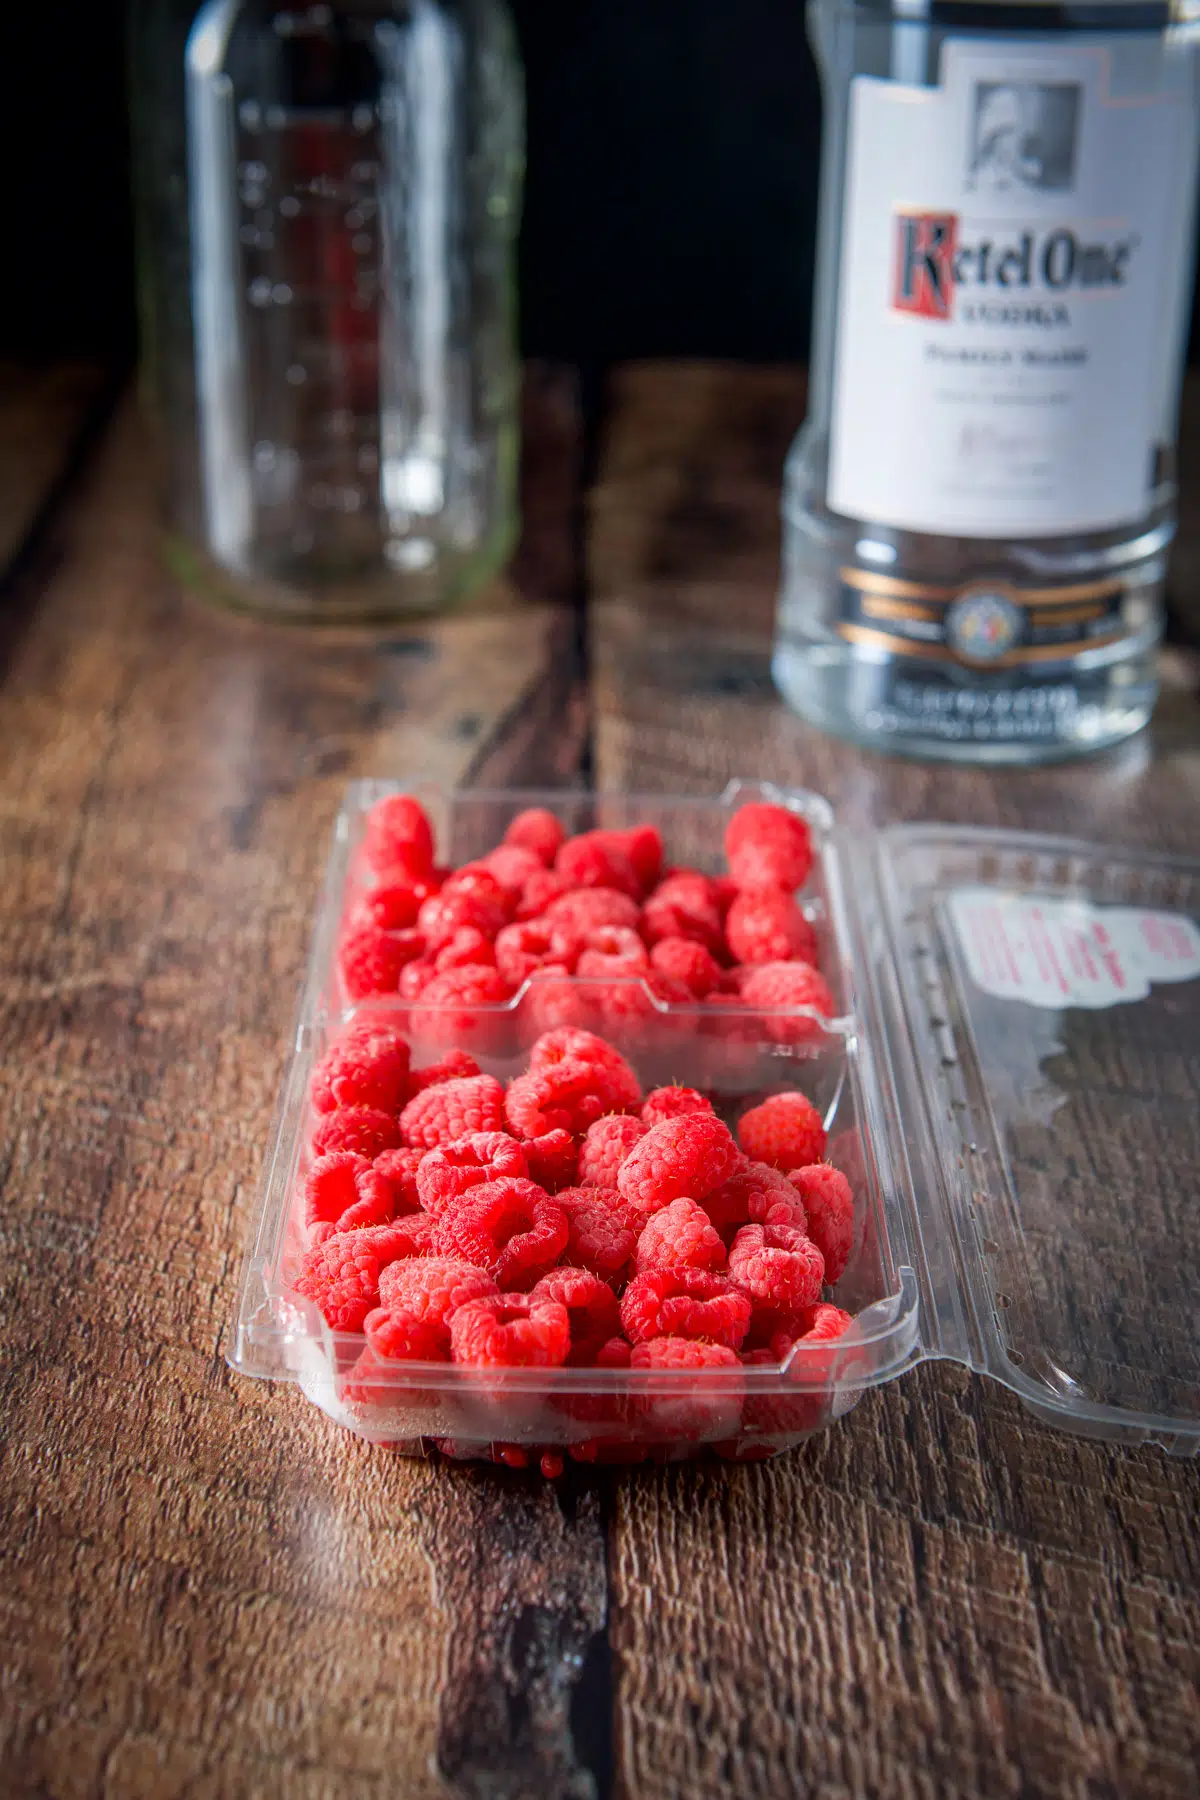 Raspberries in a plastic container, a vodka bottle and jar in the background